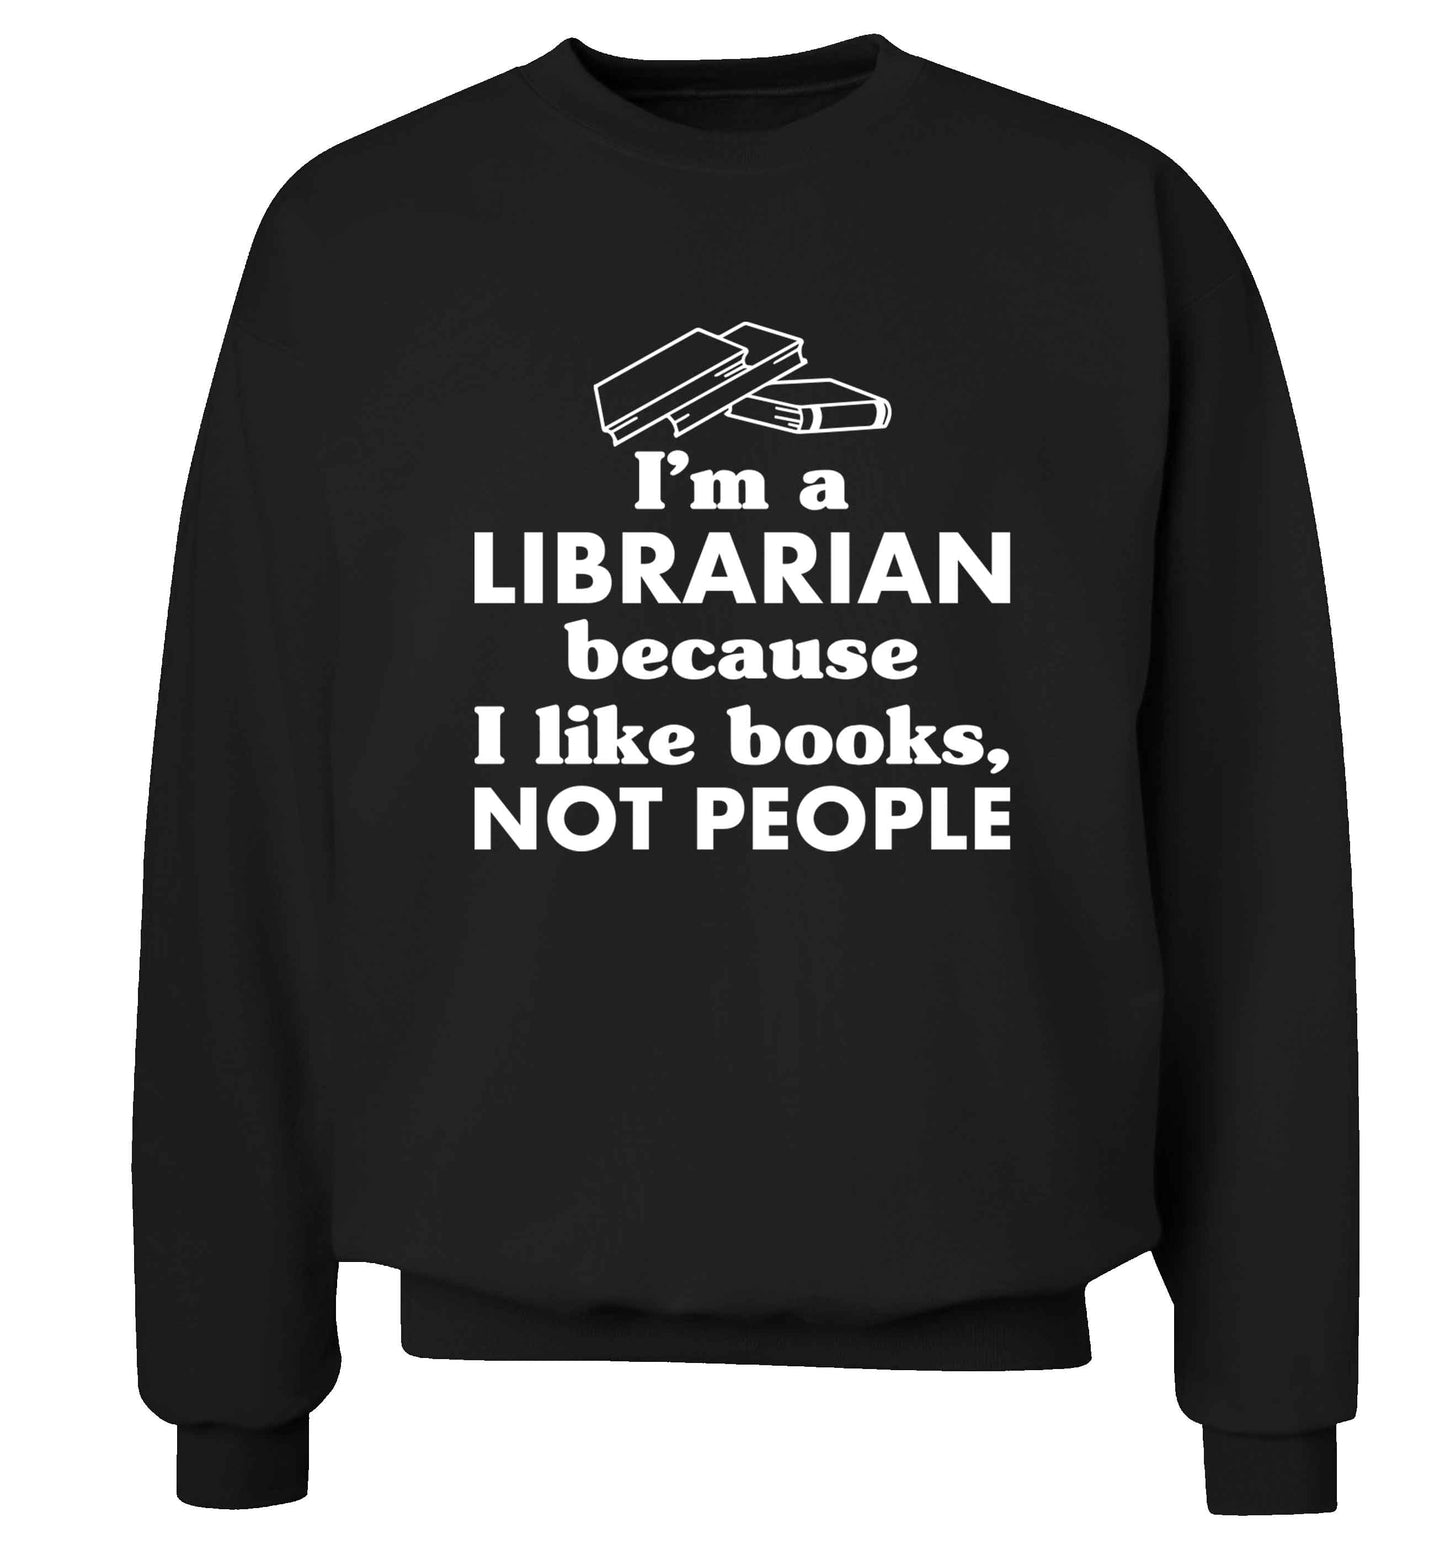 I'm a librarian because I like books not people Adult's unisex black Sweater 2XL